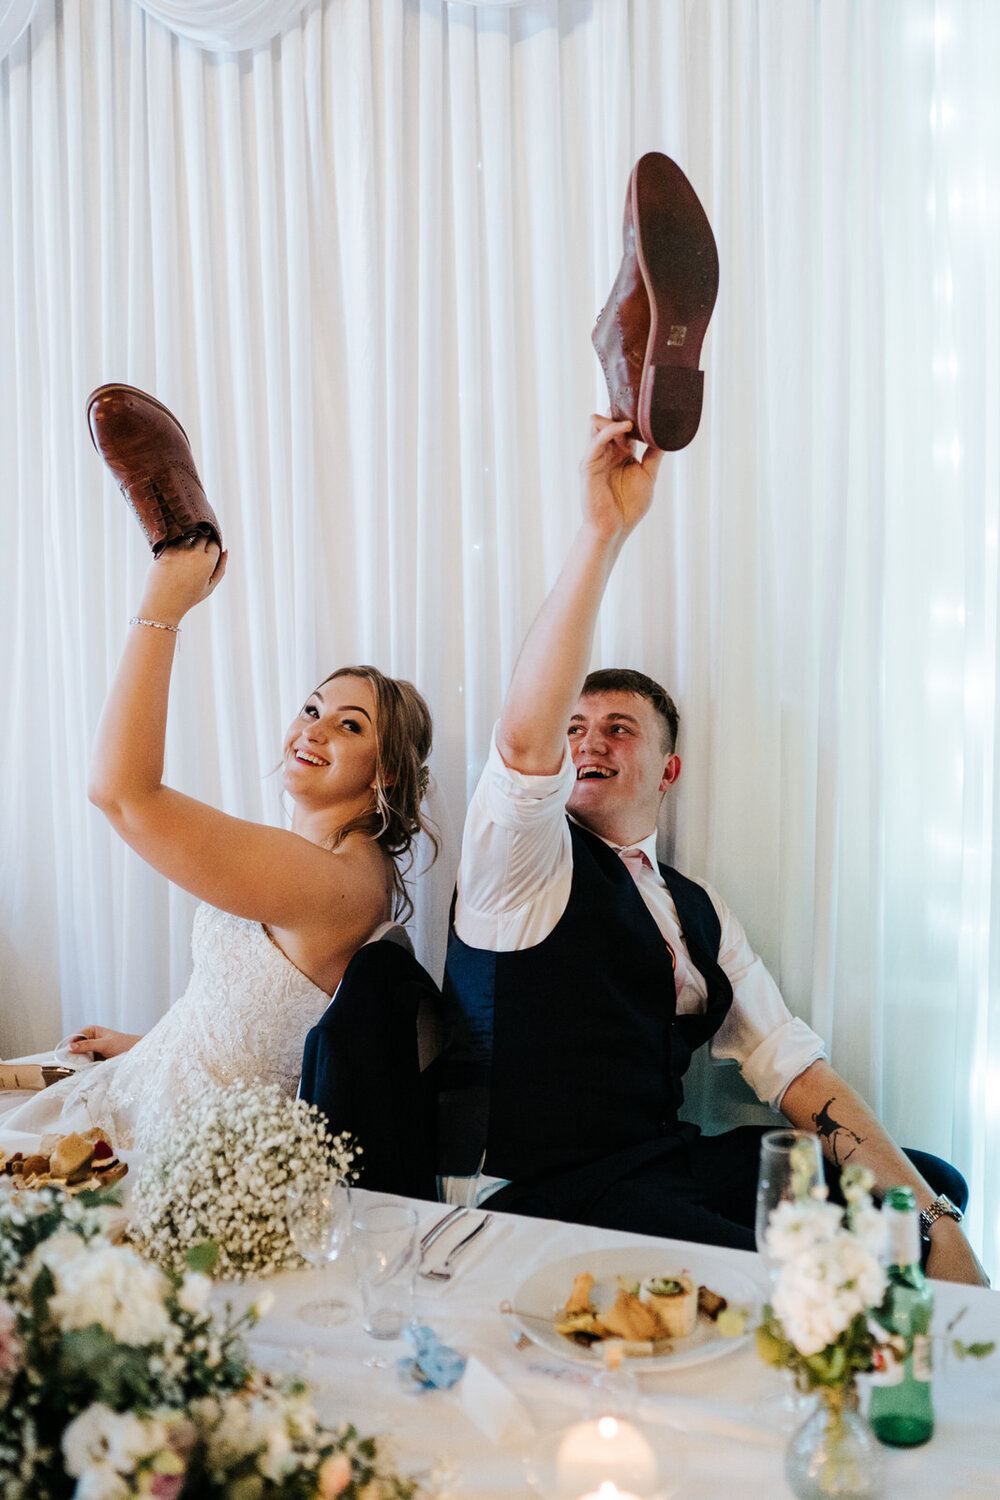 Bride and groom play an entertaining game during their wedding reception